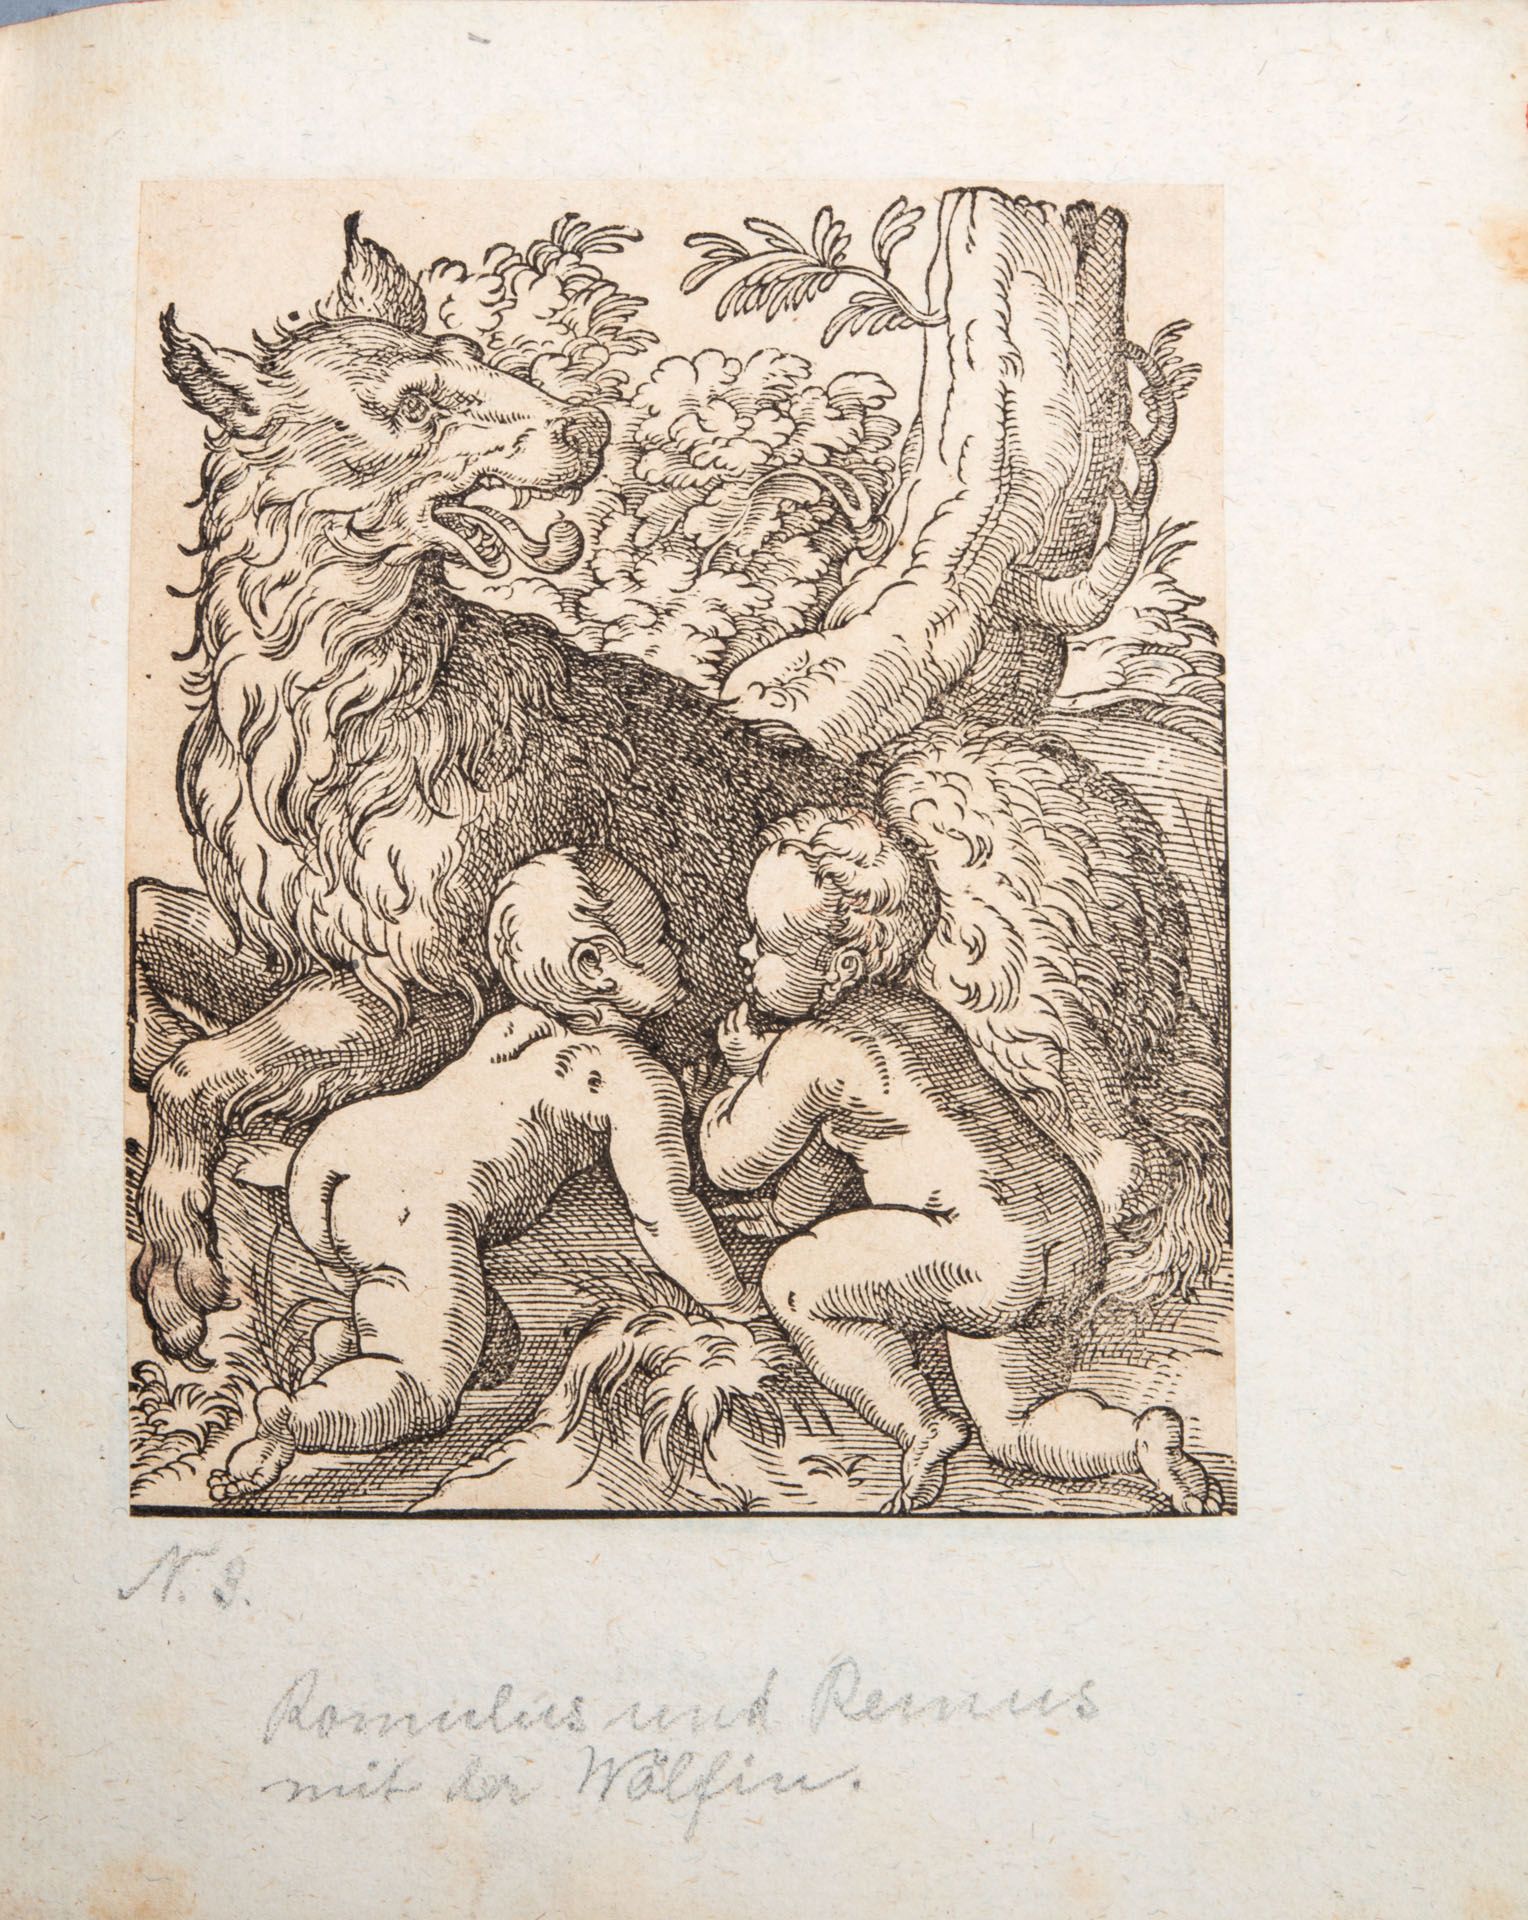 Jost Amman (1539-1591), An Album of 32 Original Engraving from the 16th Century - Image 6 of 7